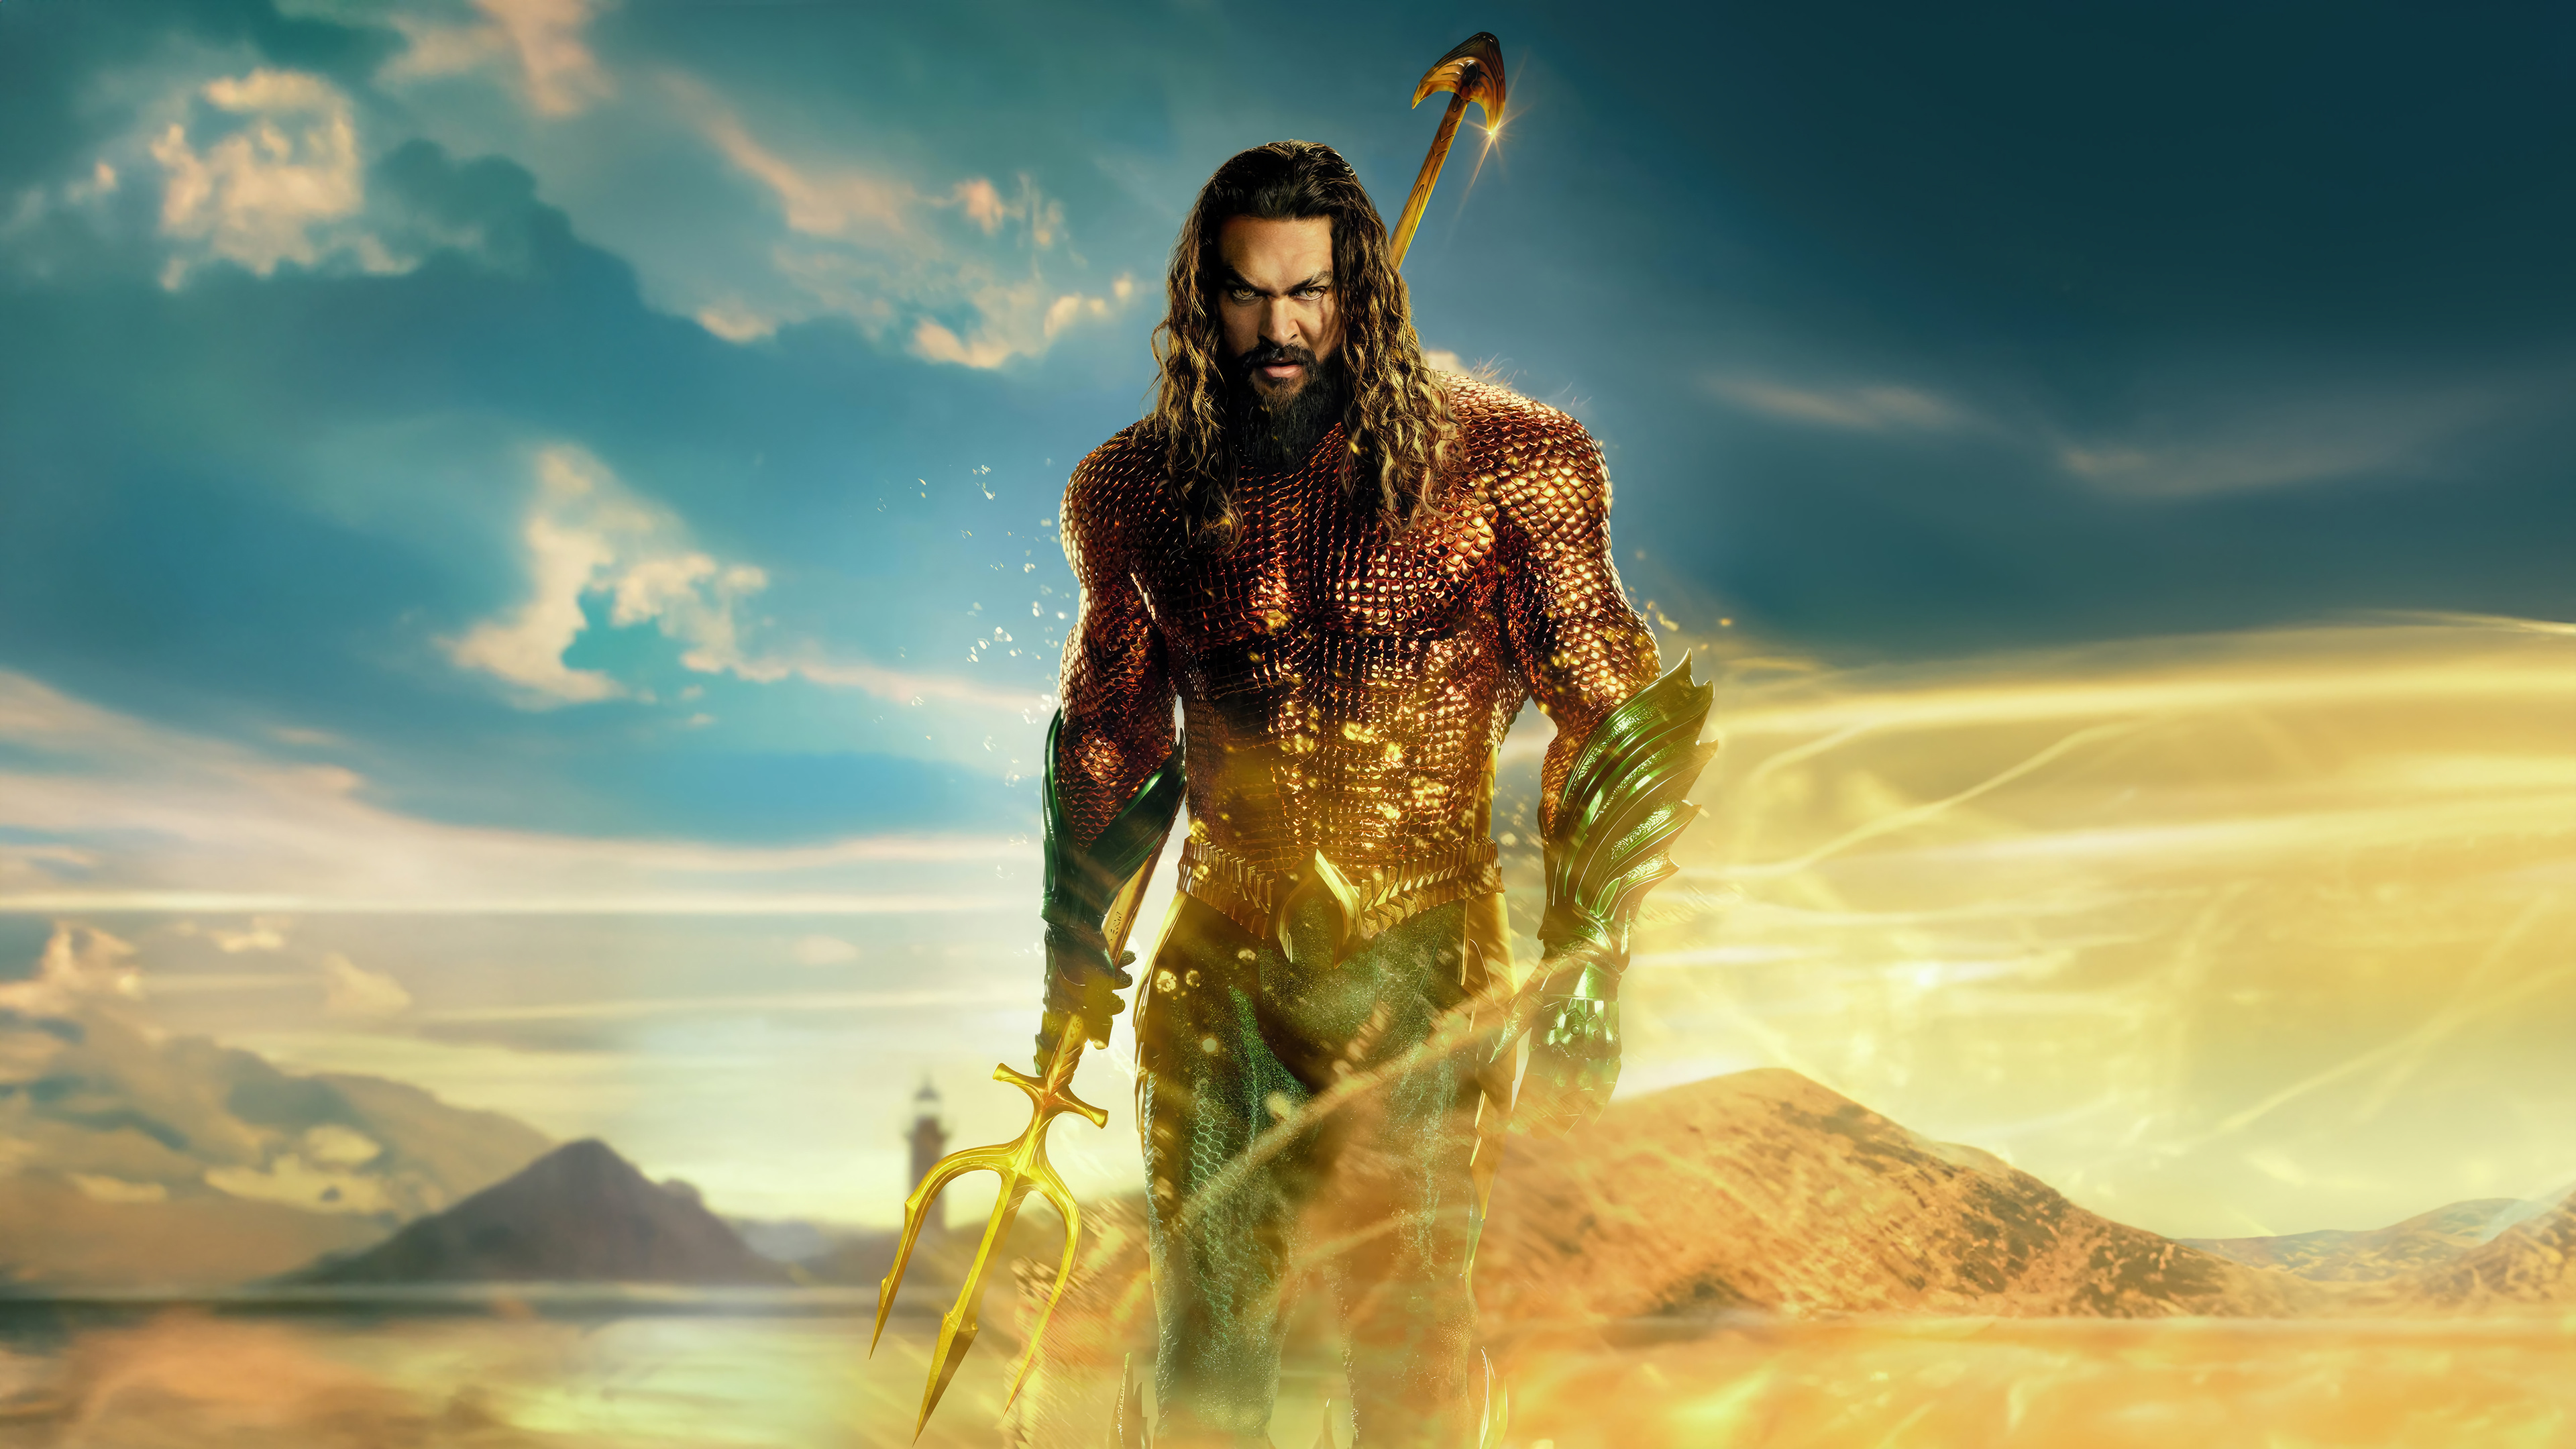 HD Wallpaper of Aquaman emerging powerfully from the sea with his trident, in a dynamic pose, ideal for a desktop background inspired by Aquaman and The Lost Kingdom.